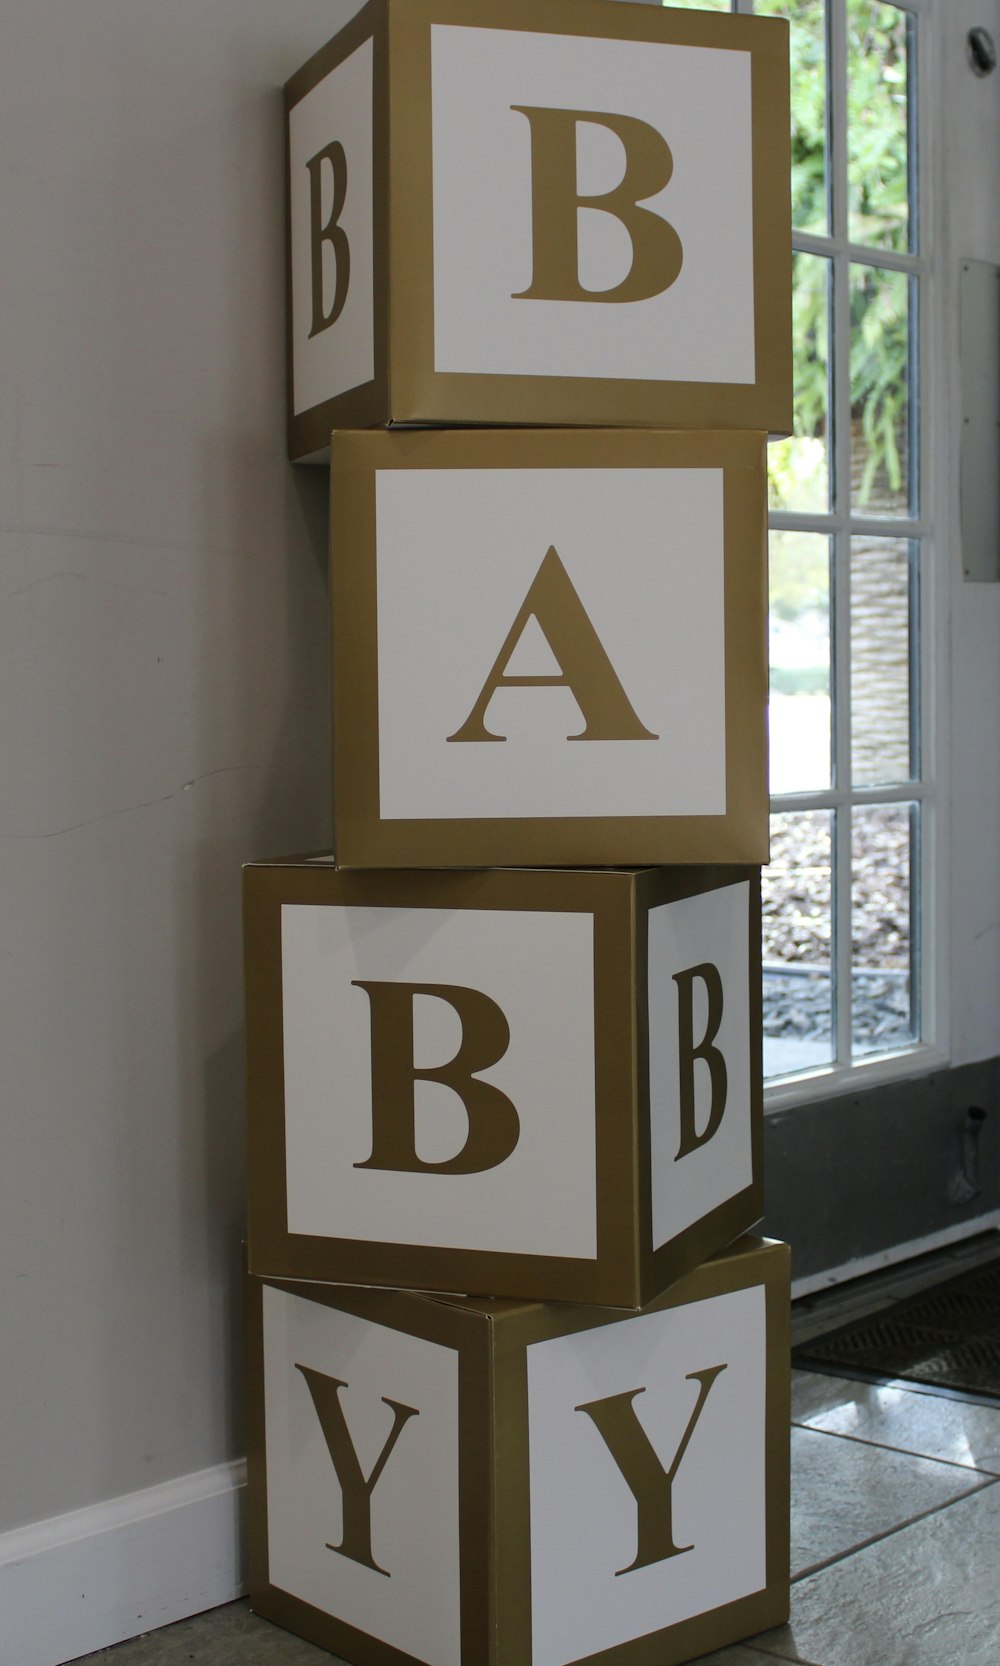 a stack of blocks with the letters b, b, and y on them